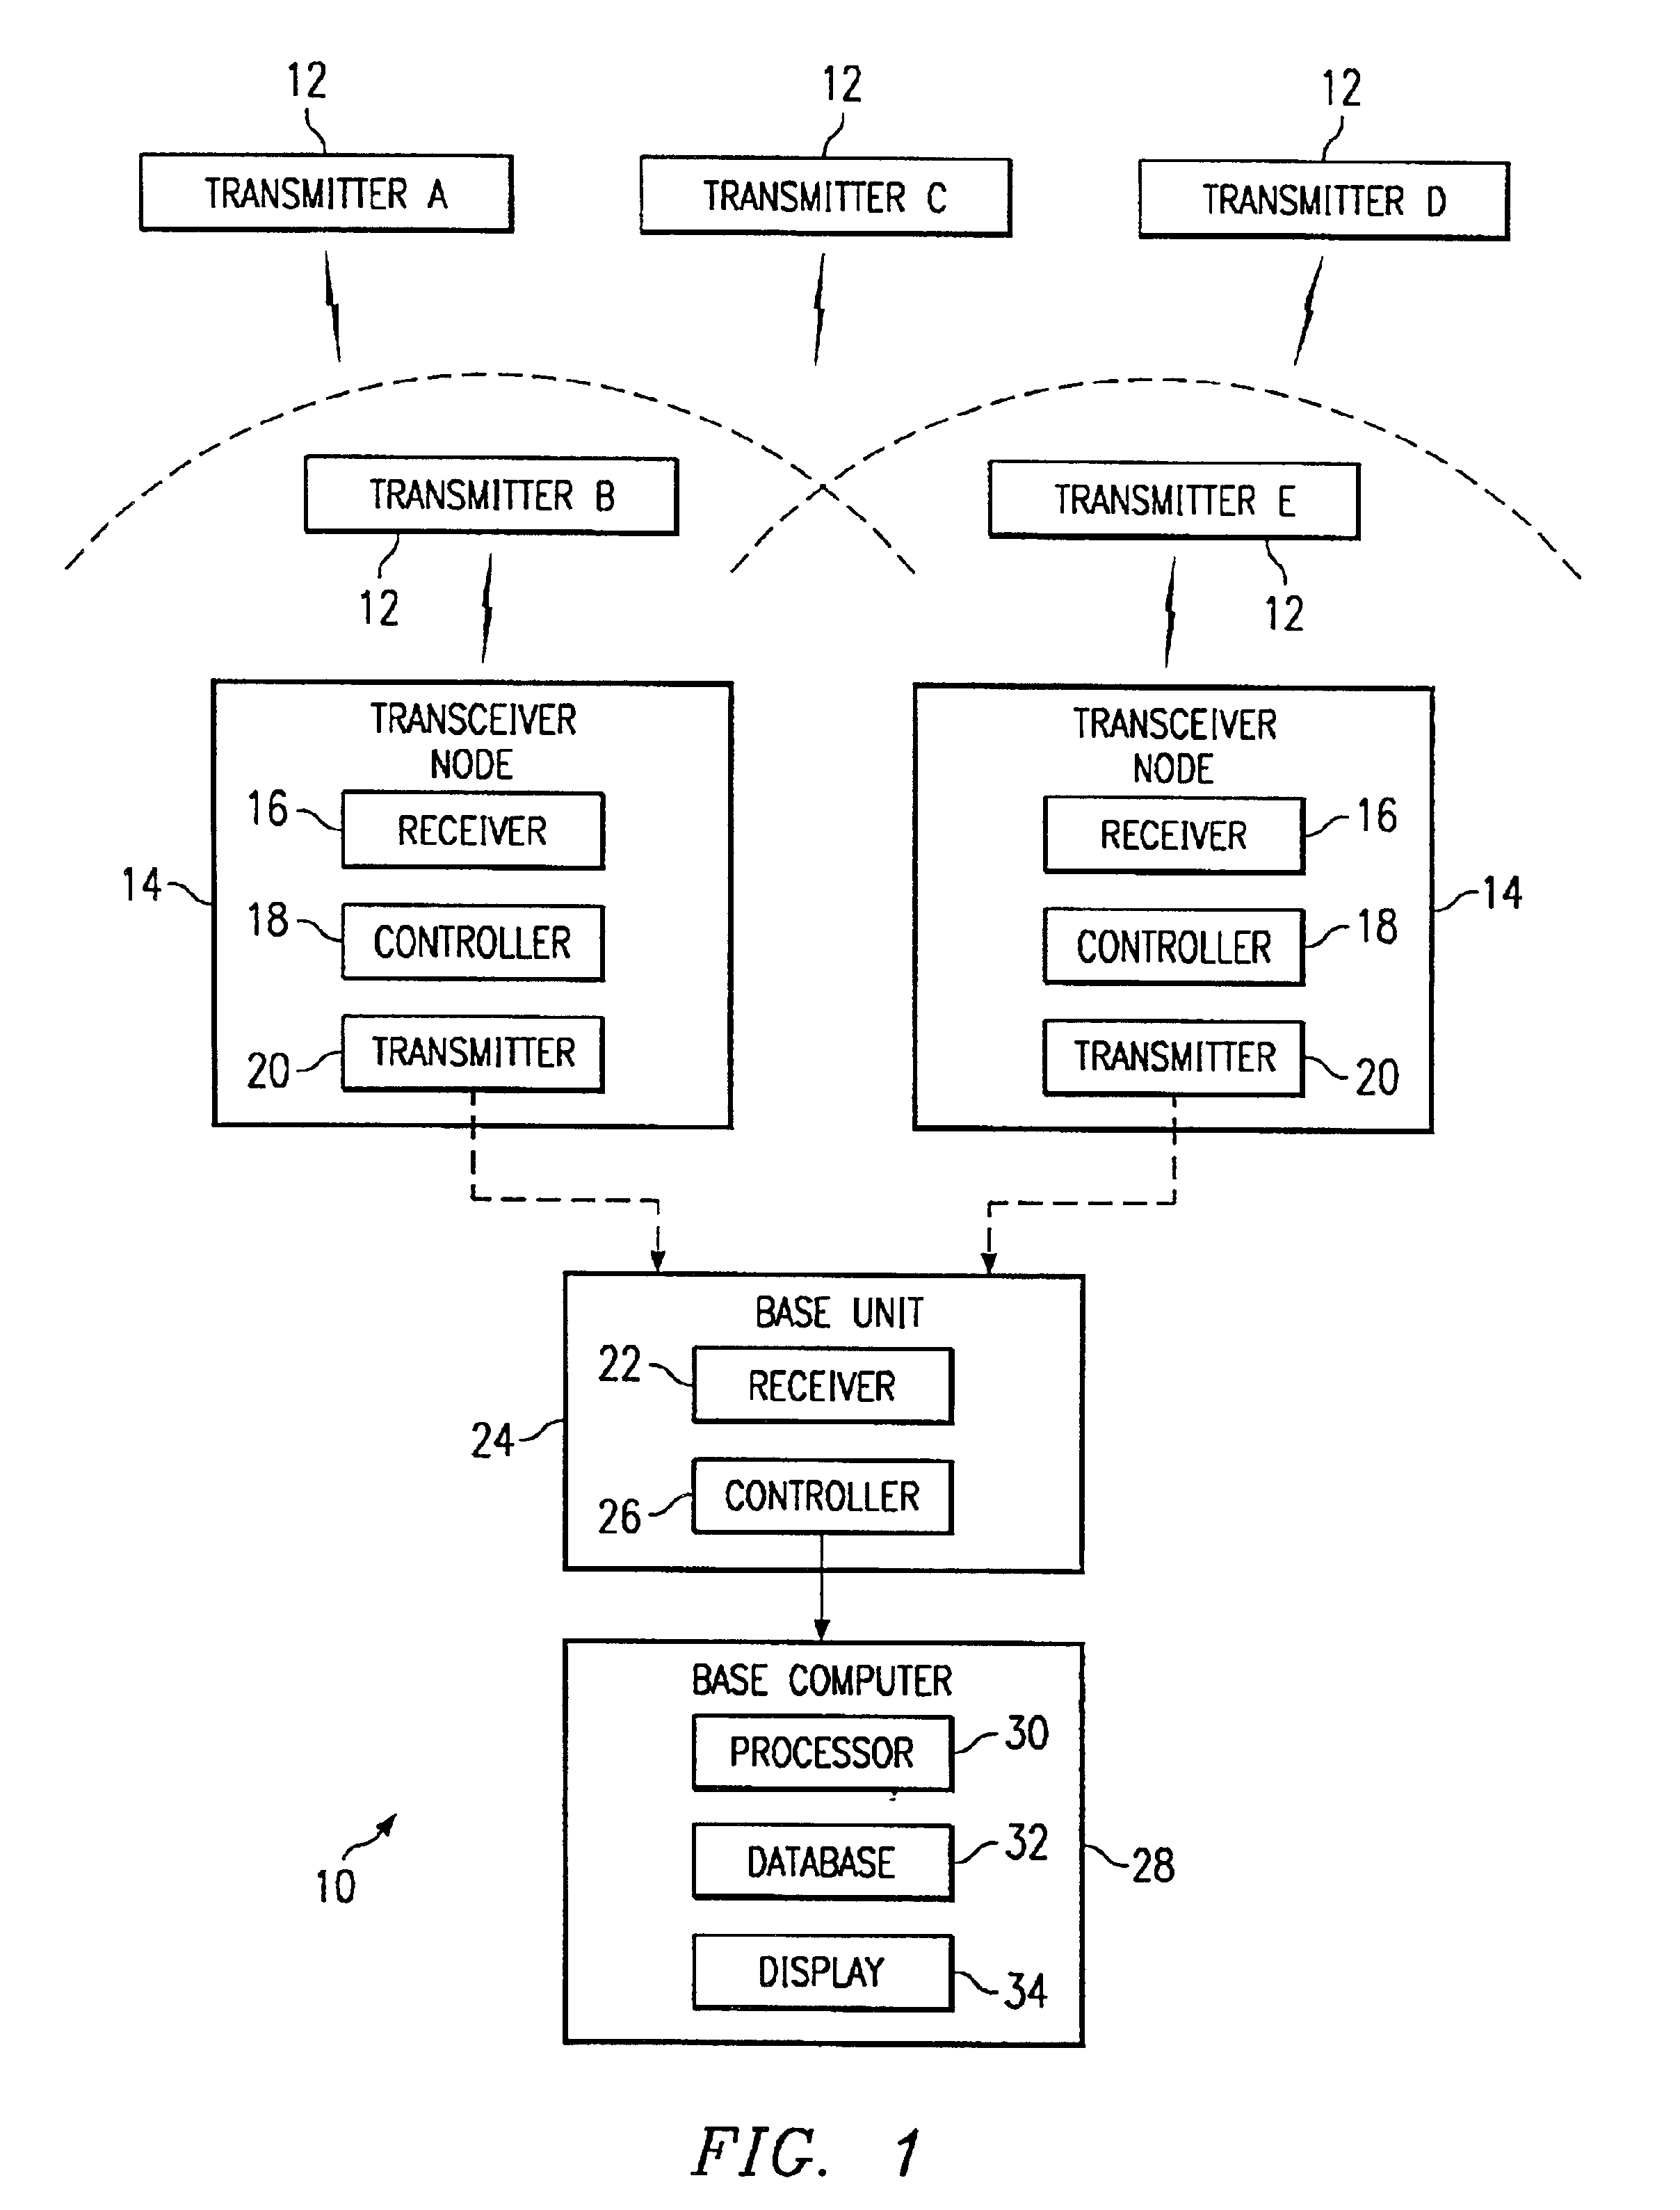 Method and system for detecting object presence and its duration in a given area